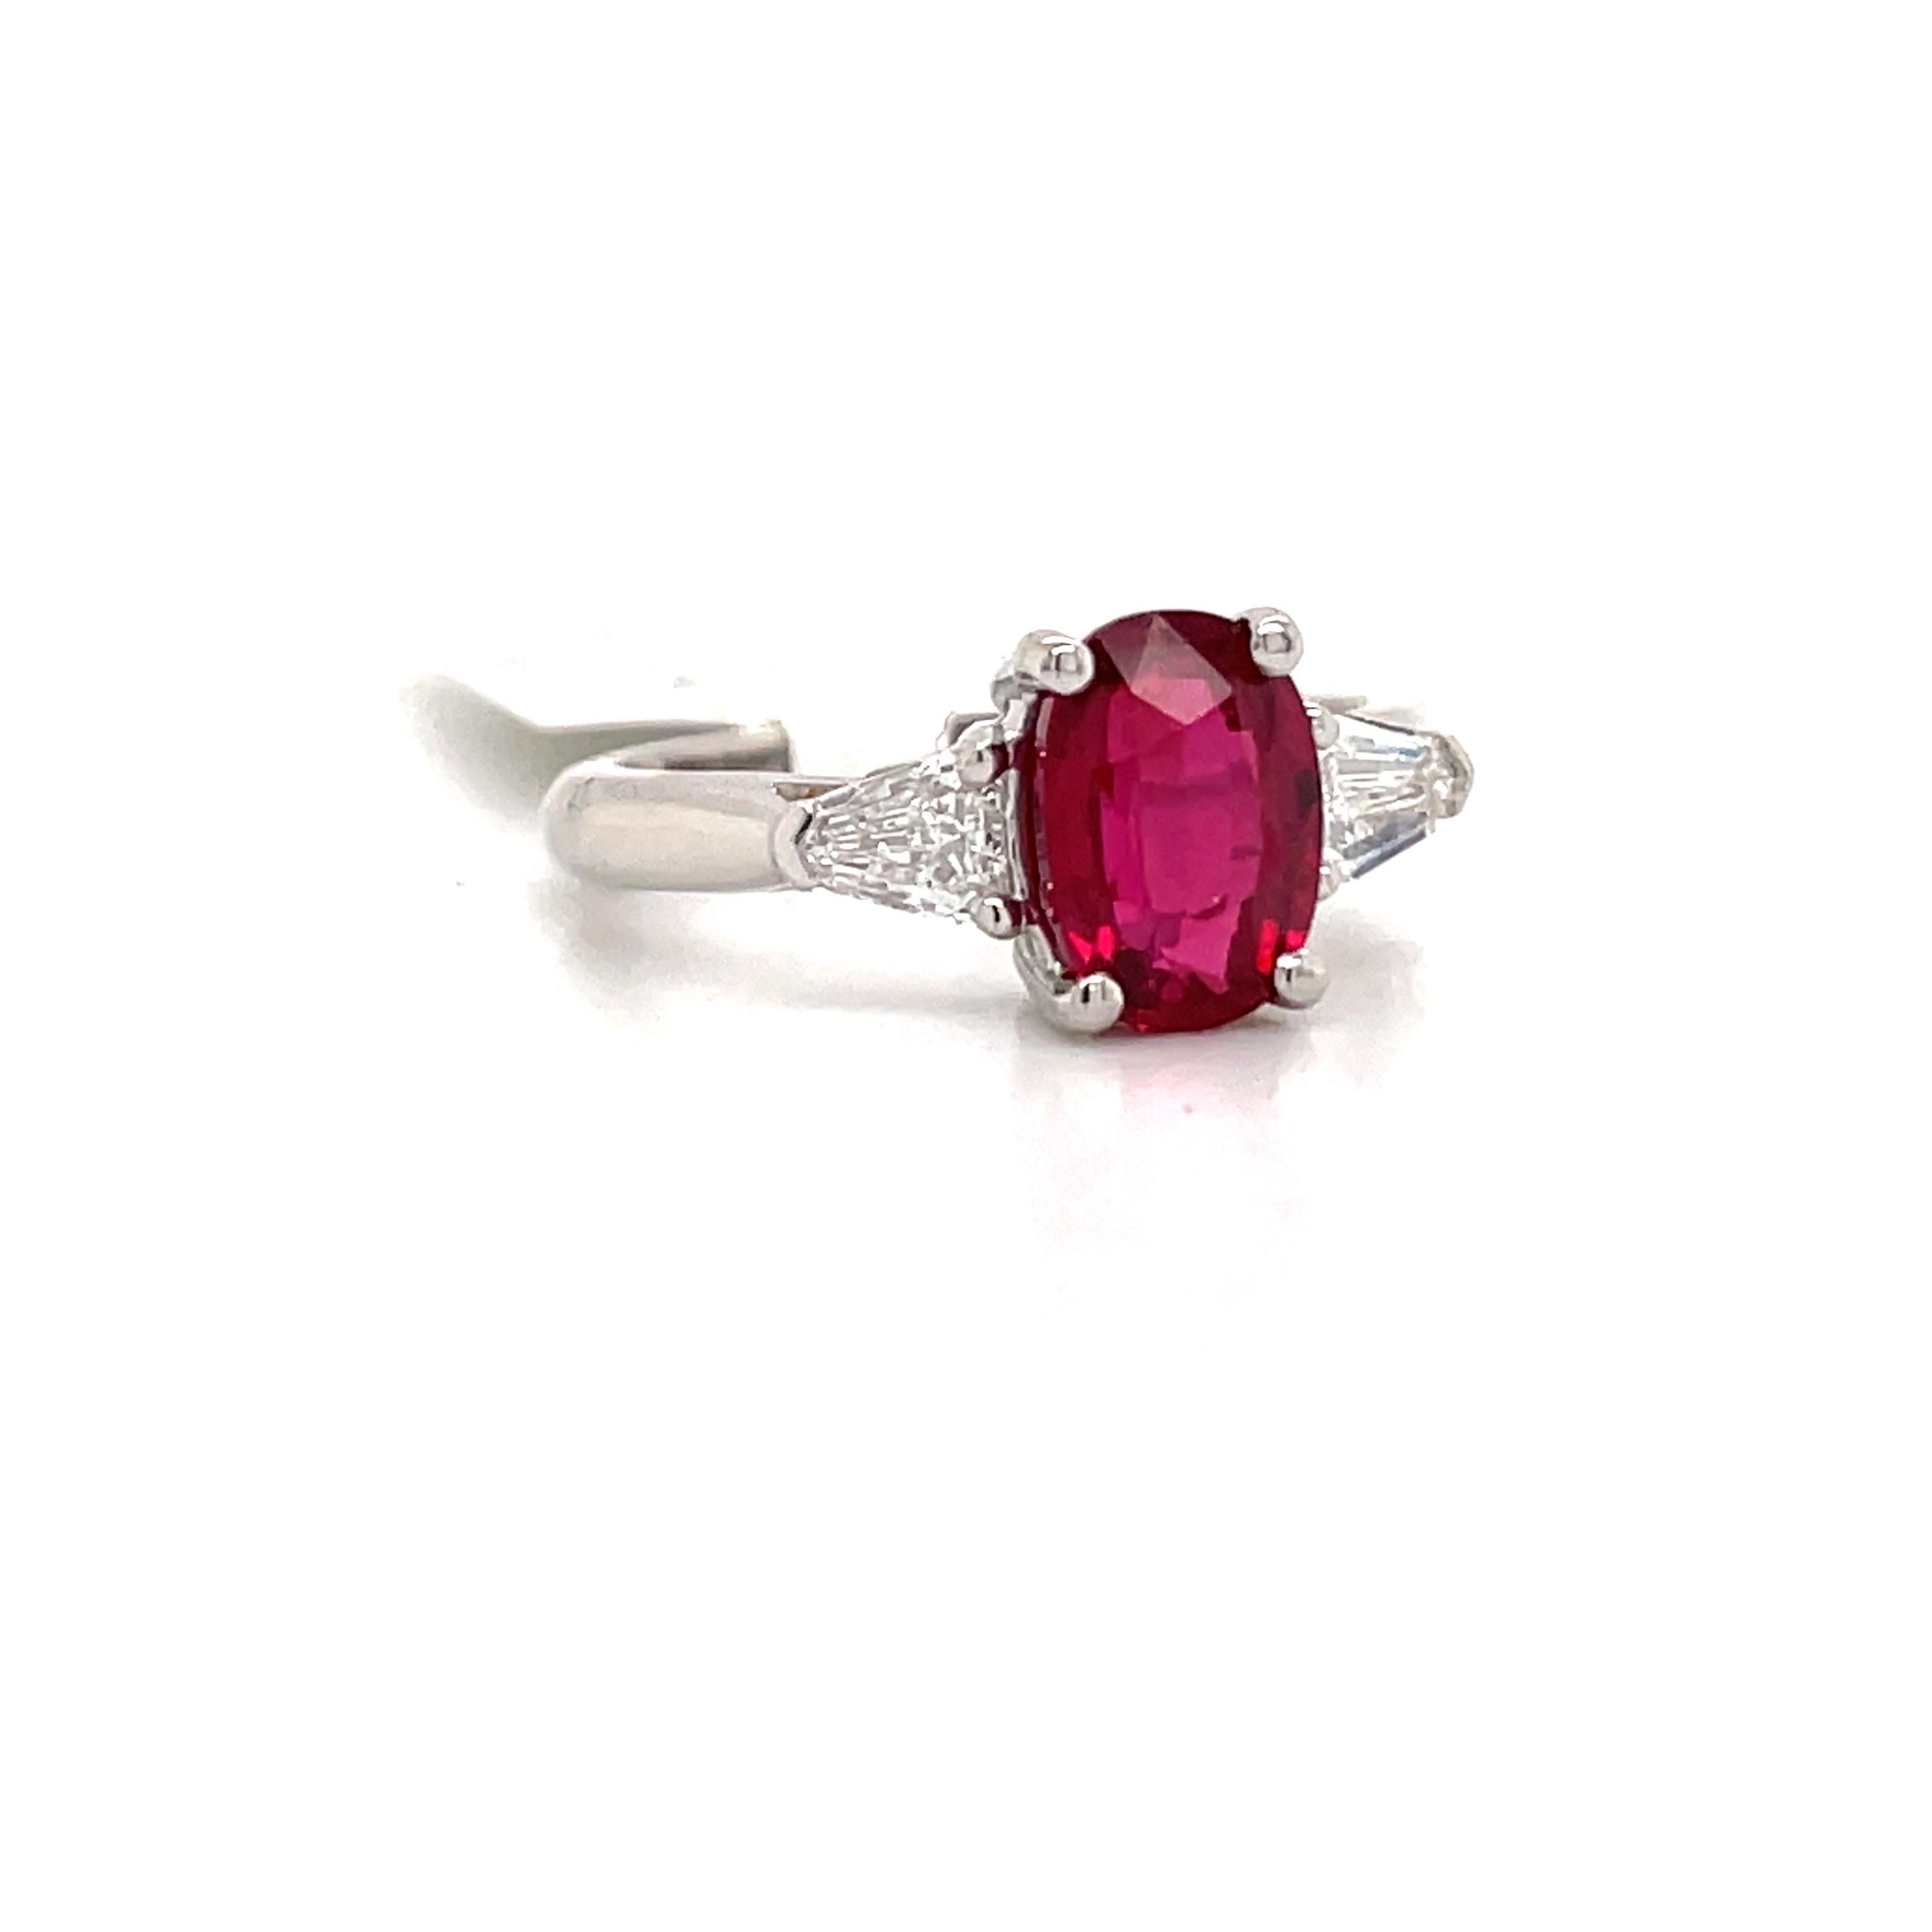 GIA Certified three stone ring featuring one oval shape red Ruby weighing 2.01 carats flanked with two bullets weighing 0.41 carats, crafted in Platinum. 
